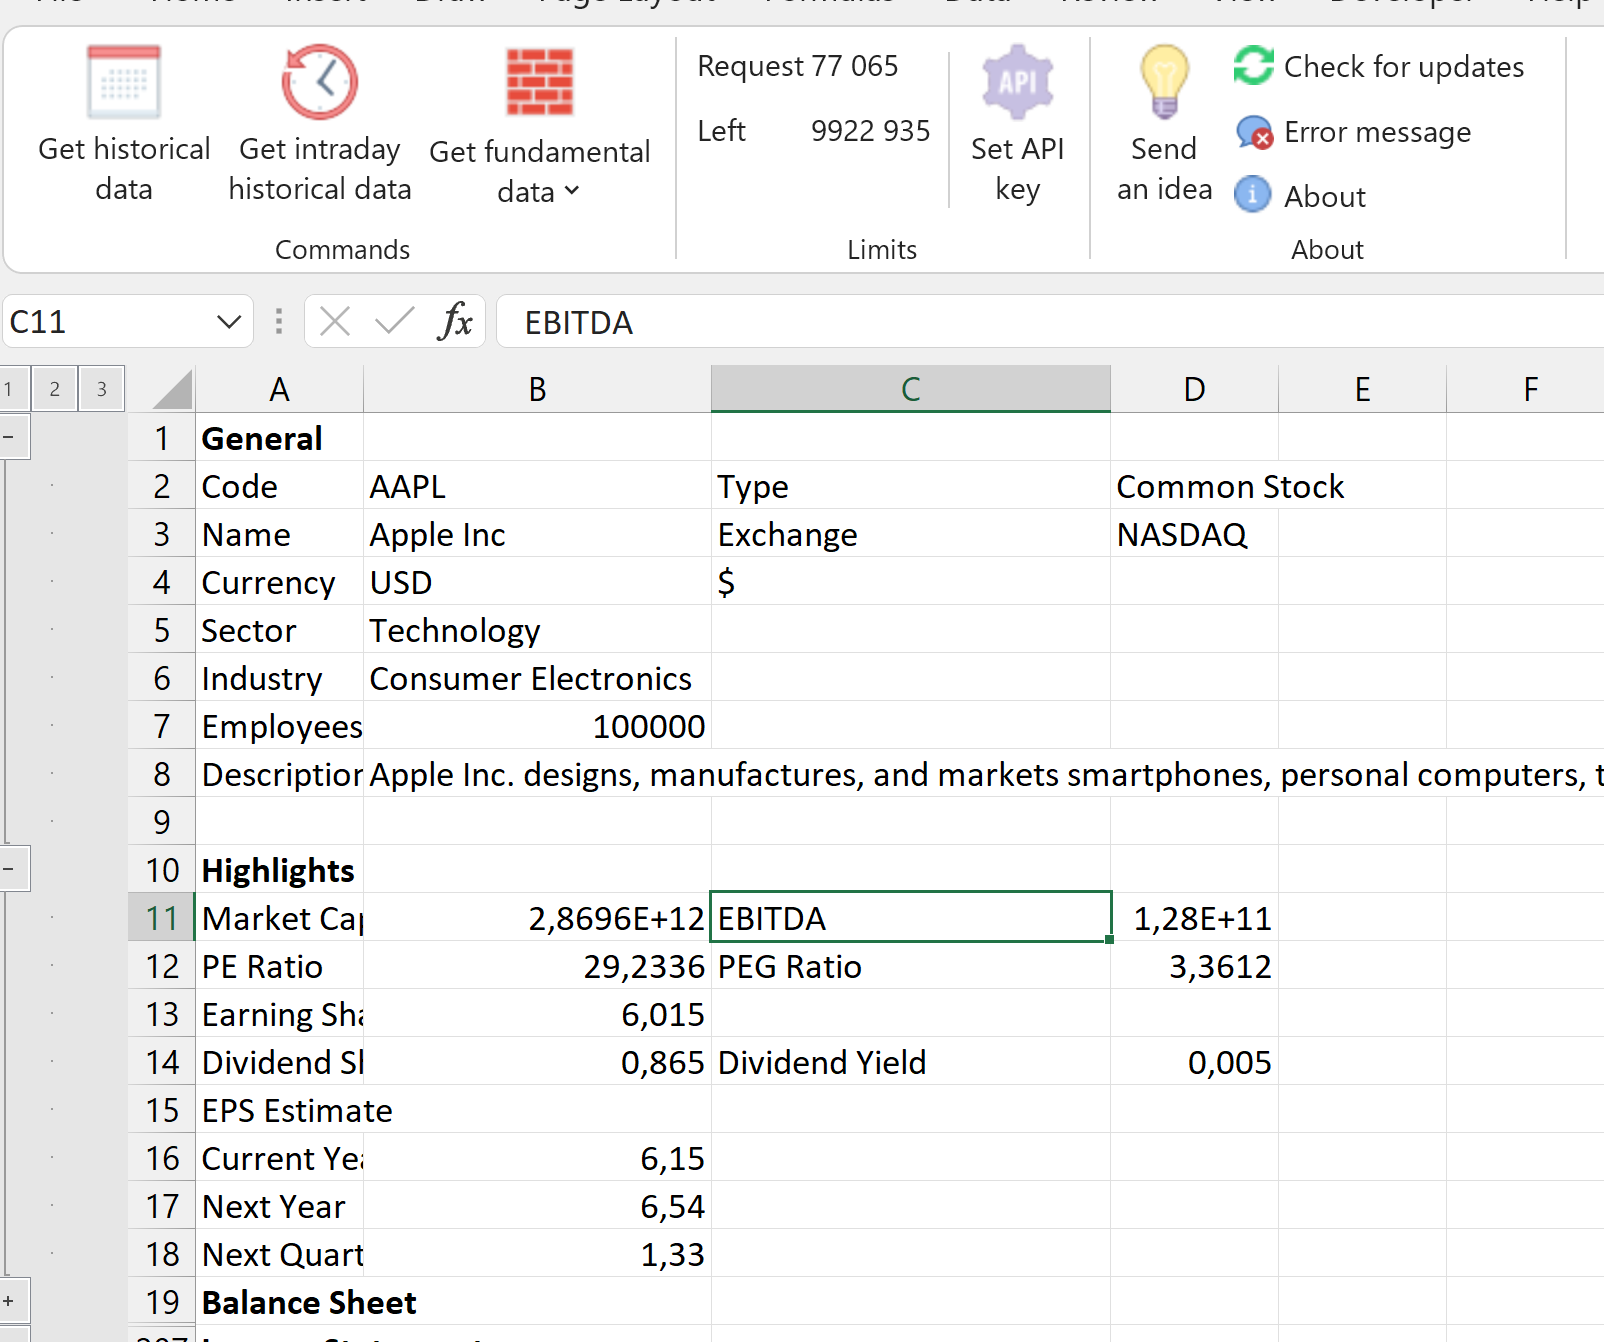 Excel Add-In for Financial Fundamental, EOD and Intraday Data.